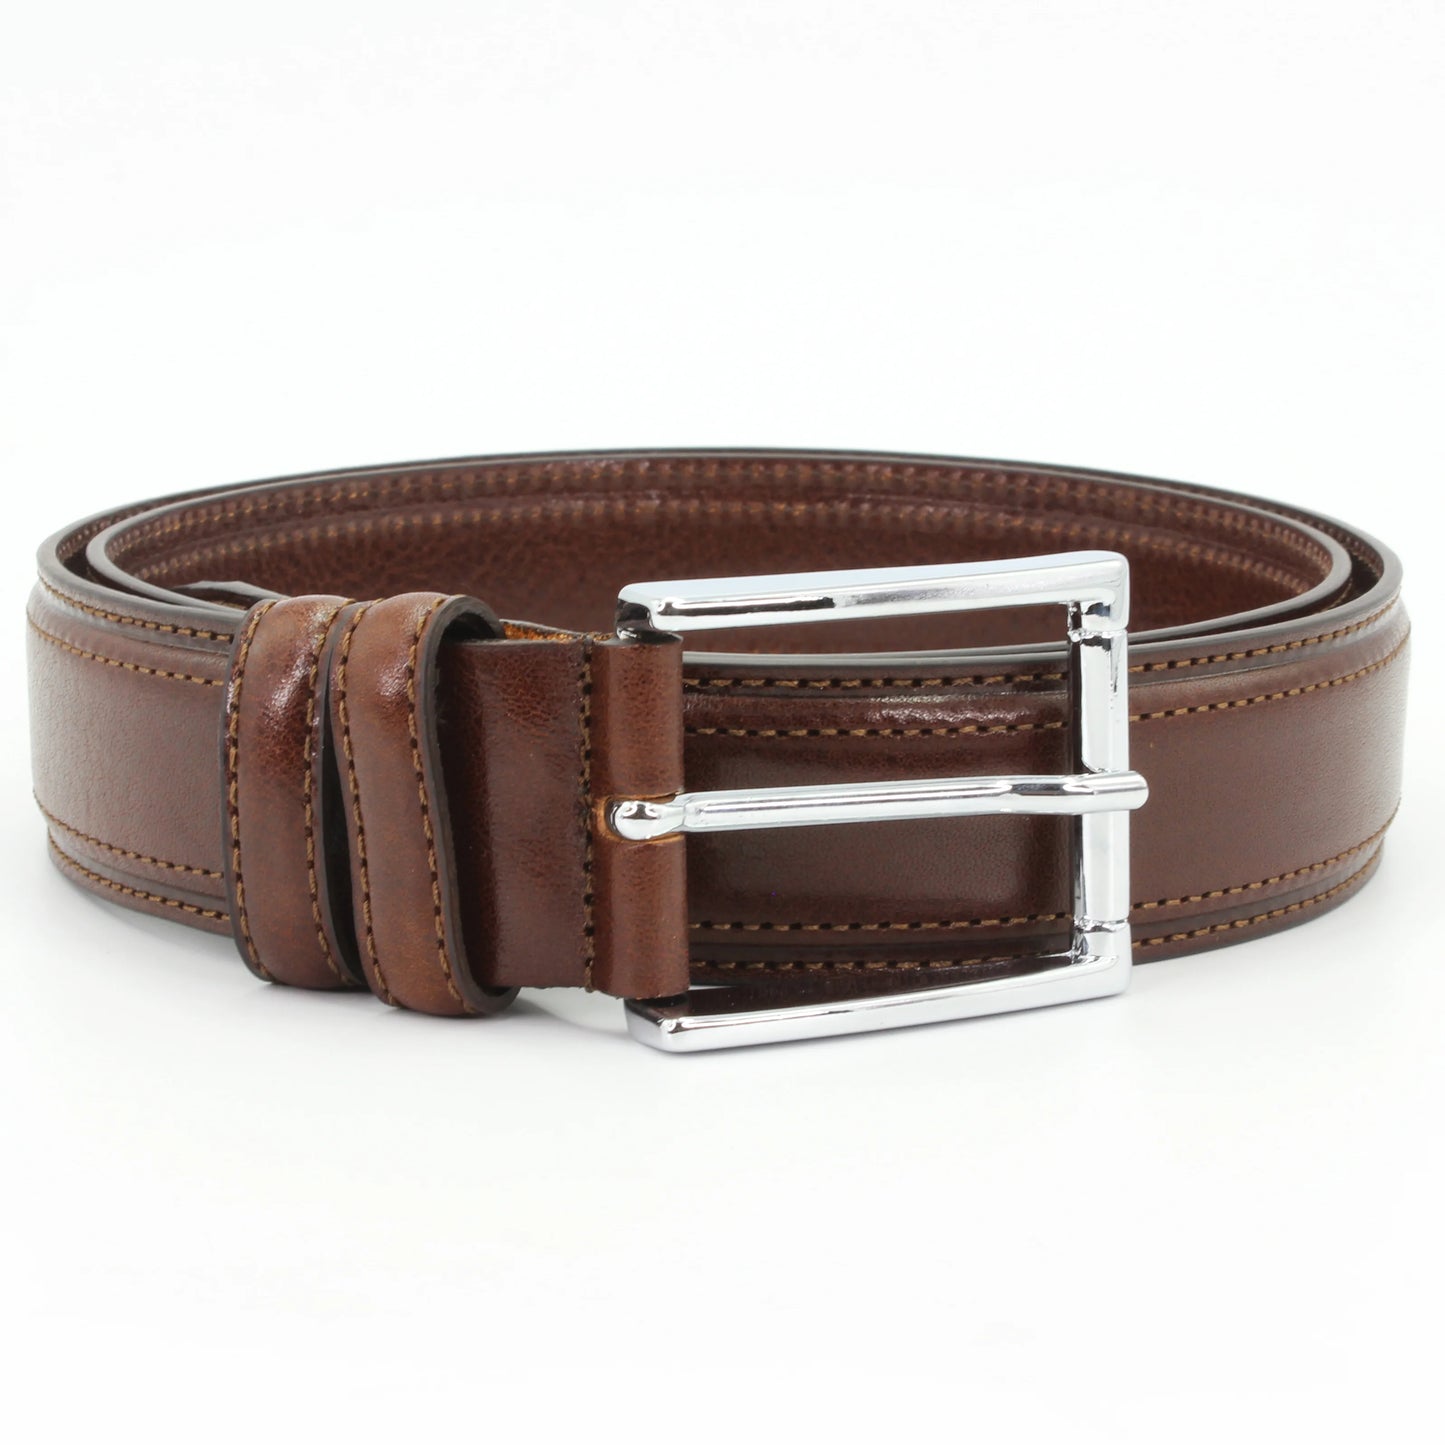 Shop our Italian-made Cuoieria Fiorentina double stitch leather belt in testa di moro (CI0DG0089G040) or browse our range of Italian belts for men & women in-store at Aliverti Cape Town, or shop online.   We deliver in South Africa & offer multiple payment plans as well as accept multiple safe & secure payment methods.